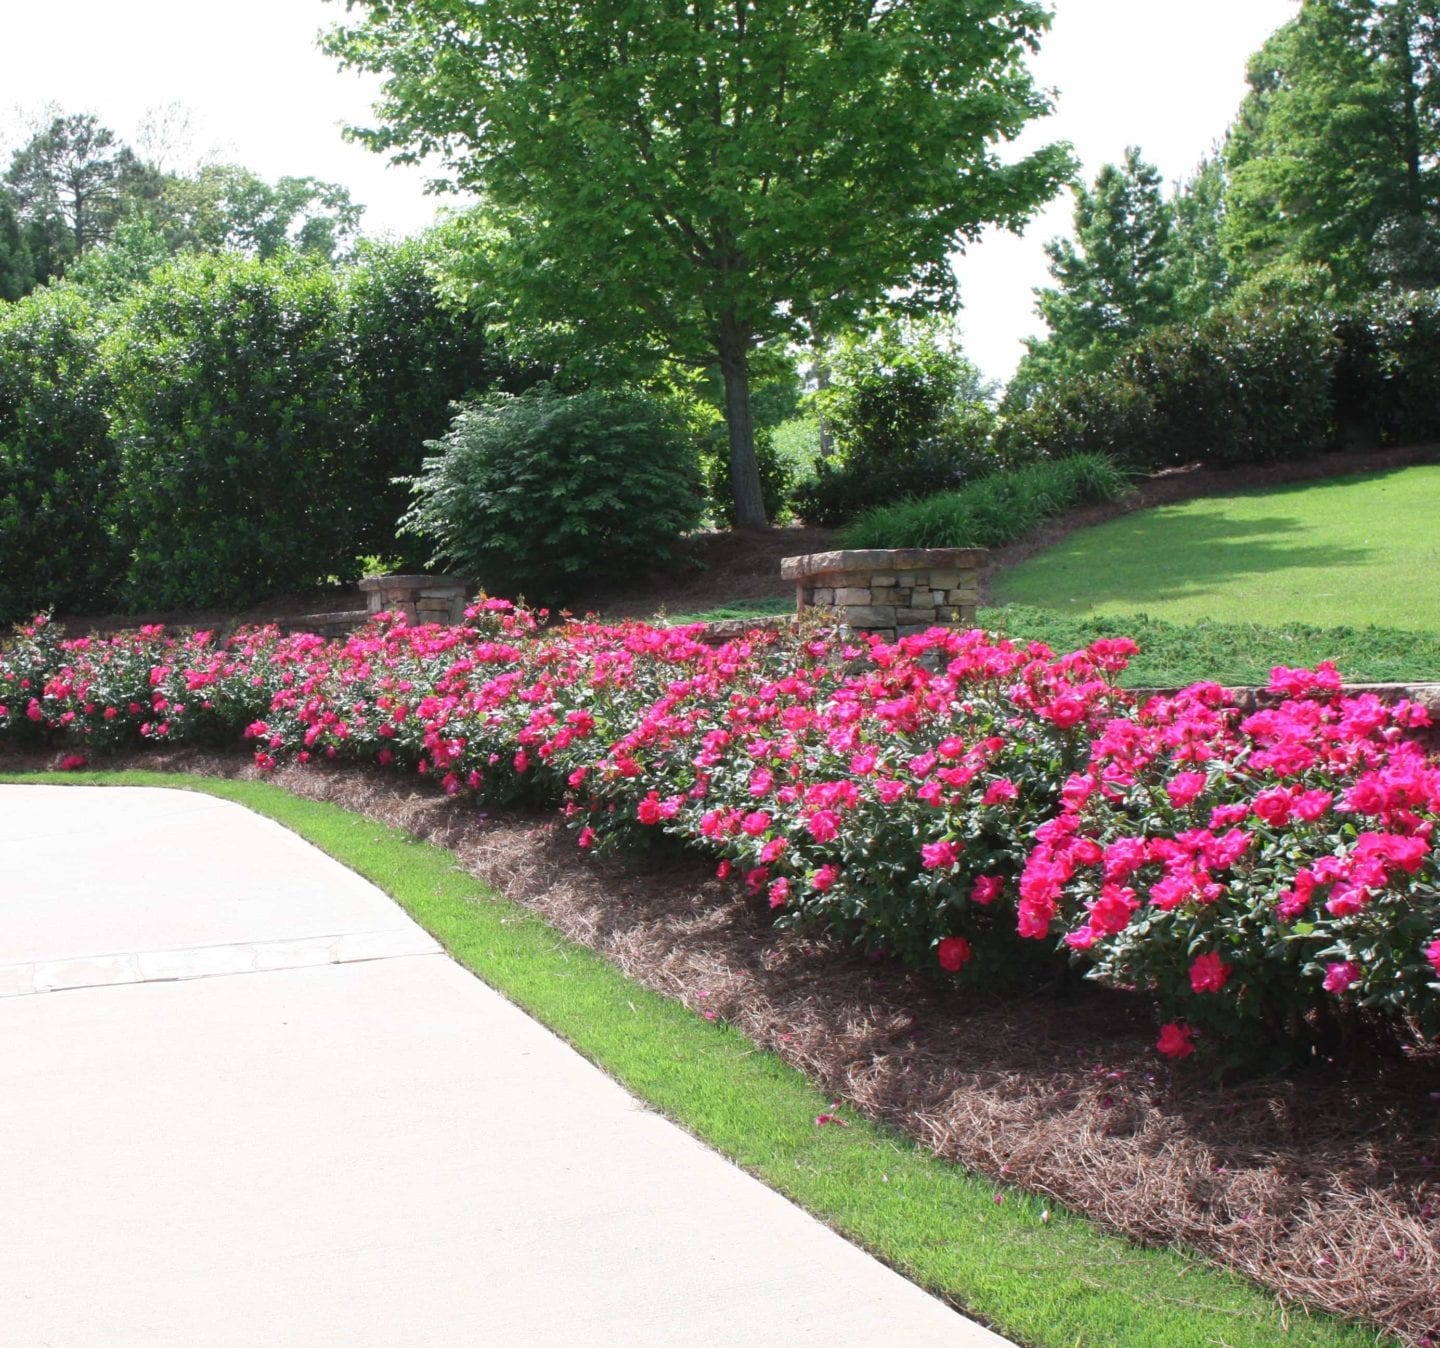 Good plants to line a driveway with.